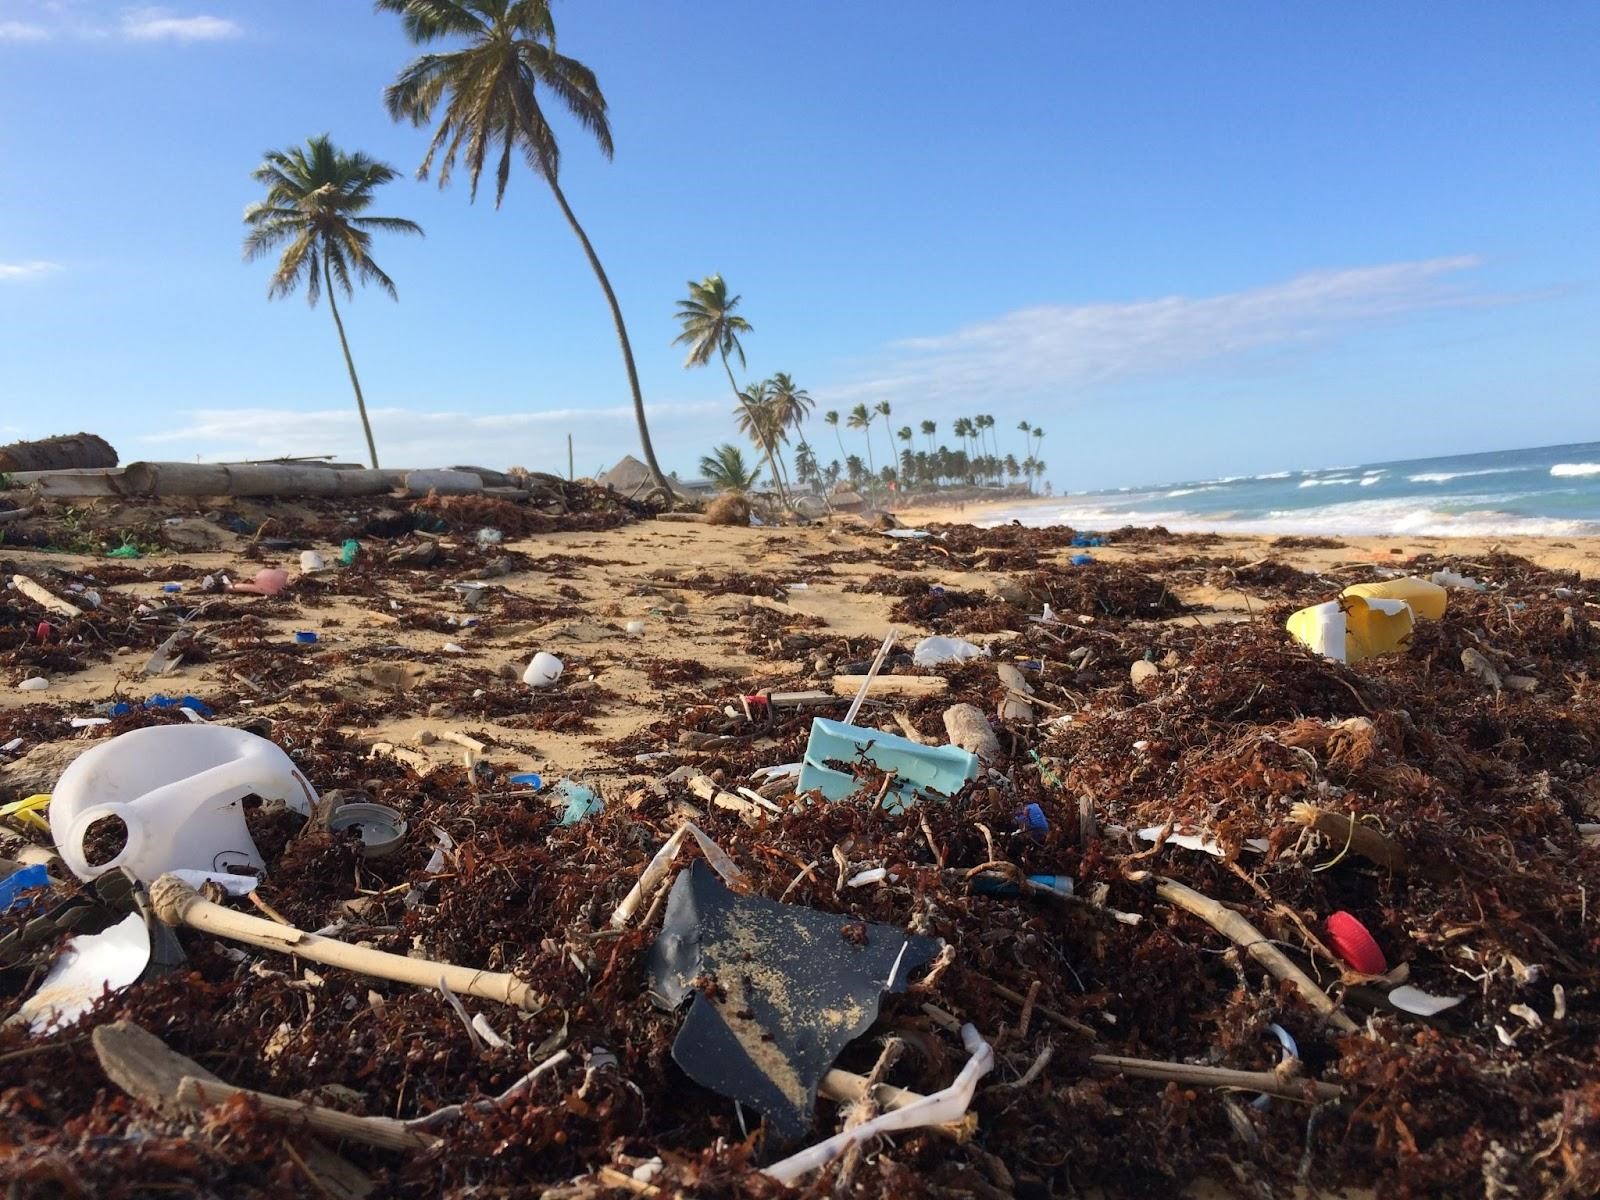 A tropical beach in Dominican Republic with a typical scenario of trash like plastic bottles and bits washed up on the shore